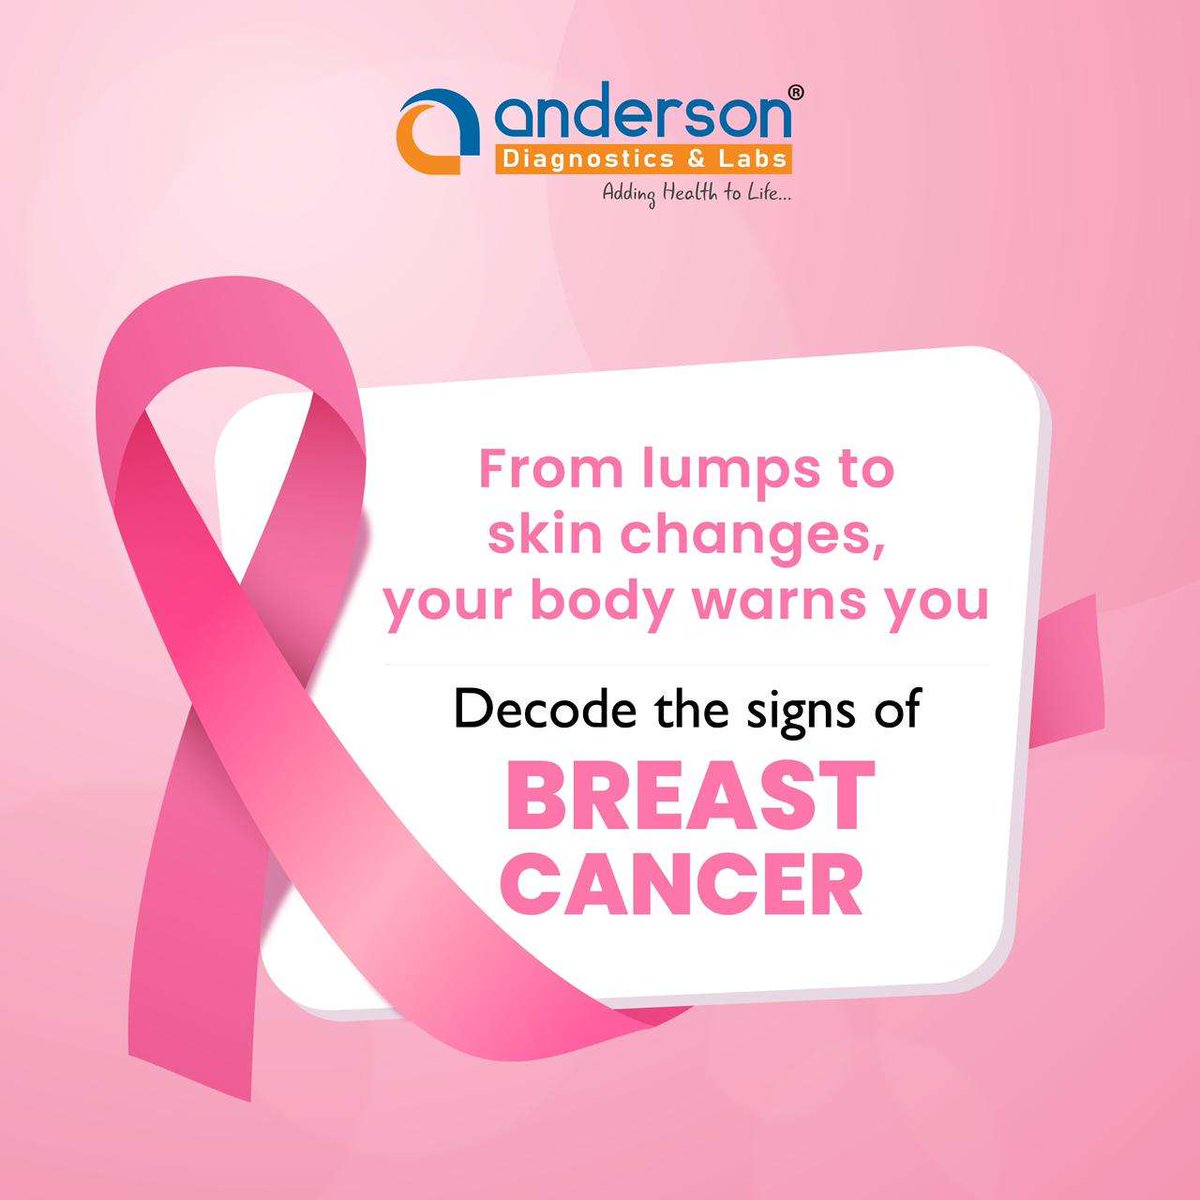 At #AndersonDiagnostics and Labs, we're committed to providing accurate and early detection of #breastcancer through state-of-the-art diagnostic tests. Your health is our priority. 💯

#BreastCancerAwareness #BreastCancerScreening #Mammography #EndBreastCancer